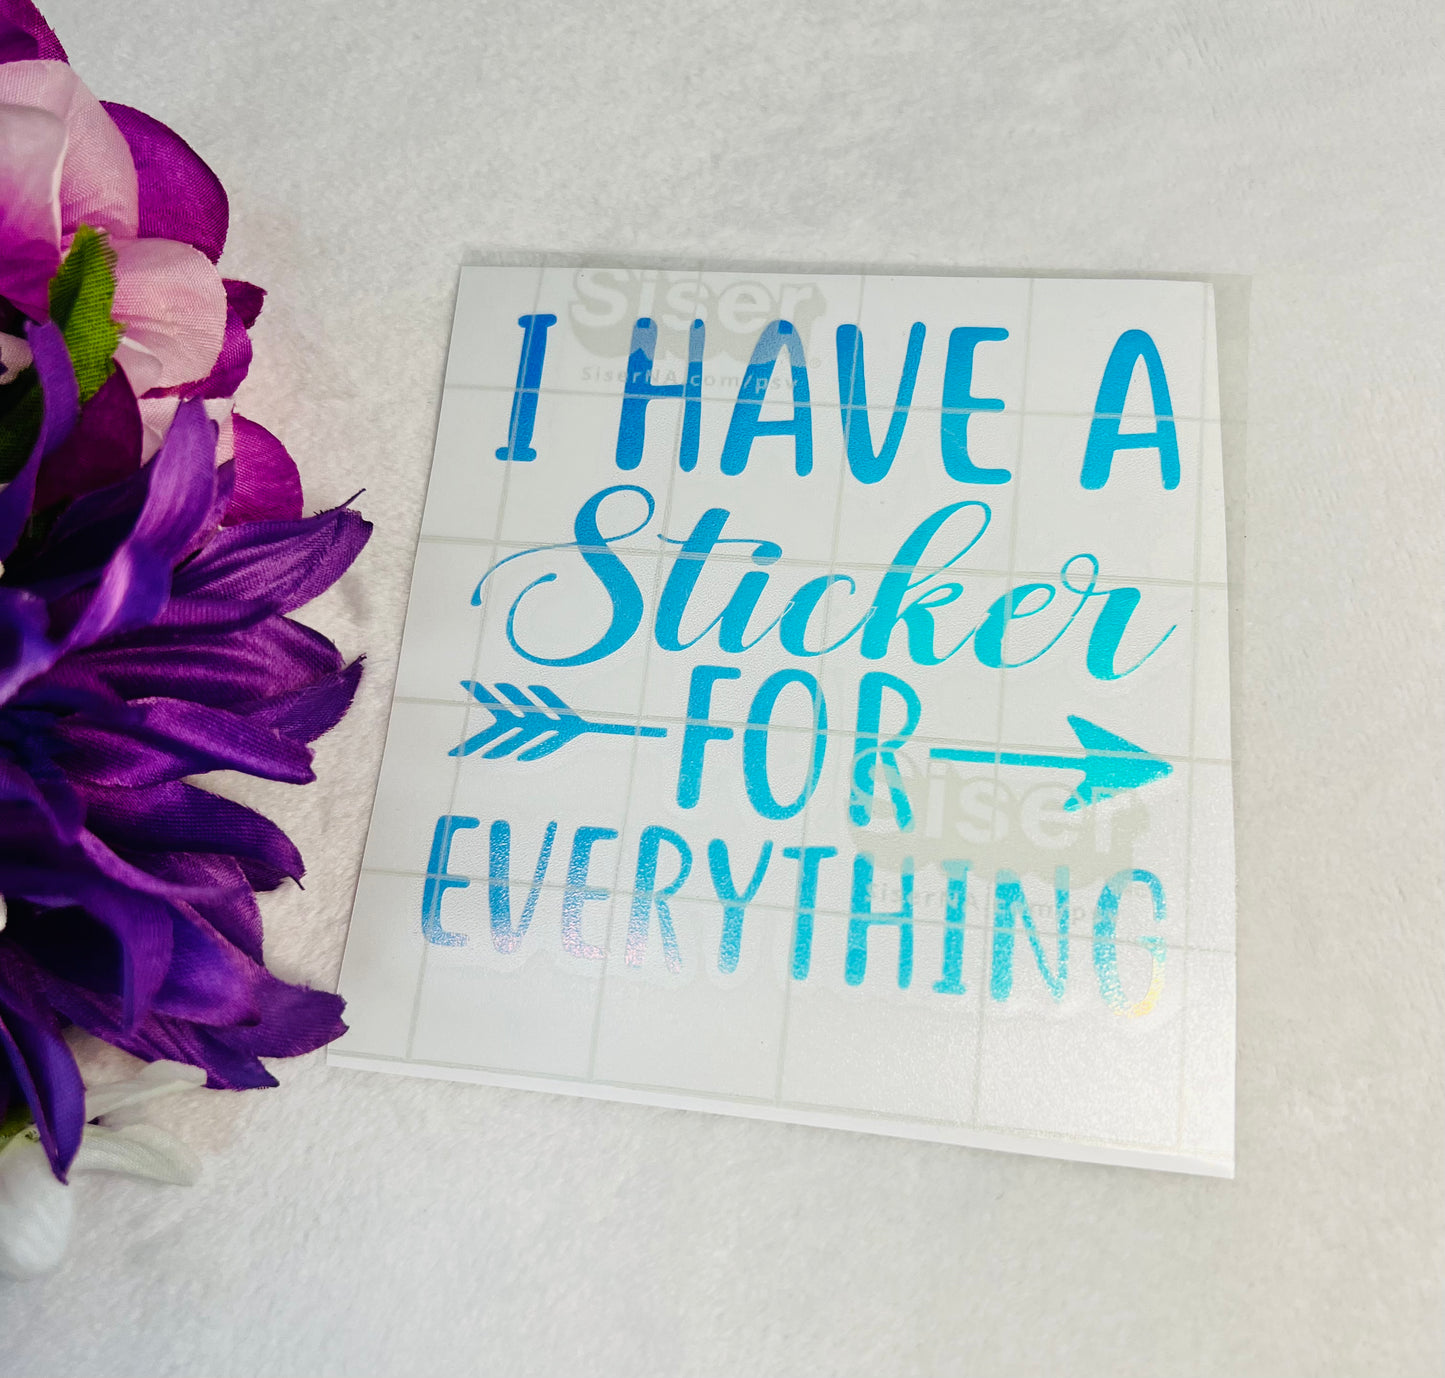 4"x4" I Have a Sticker for Everything Vinyl Decal